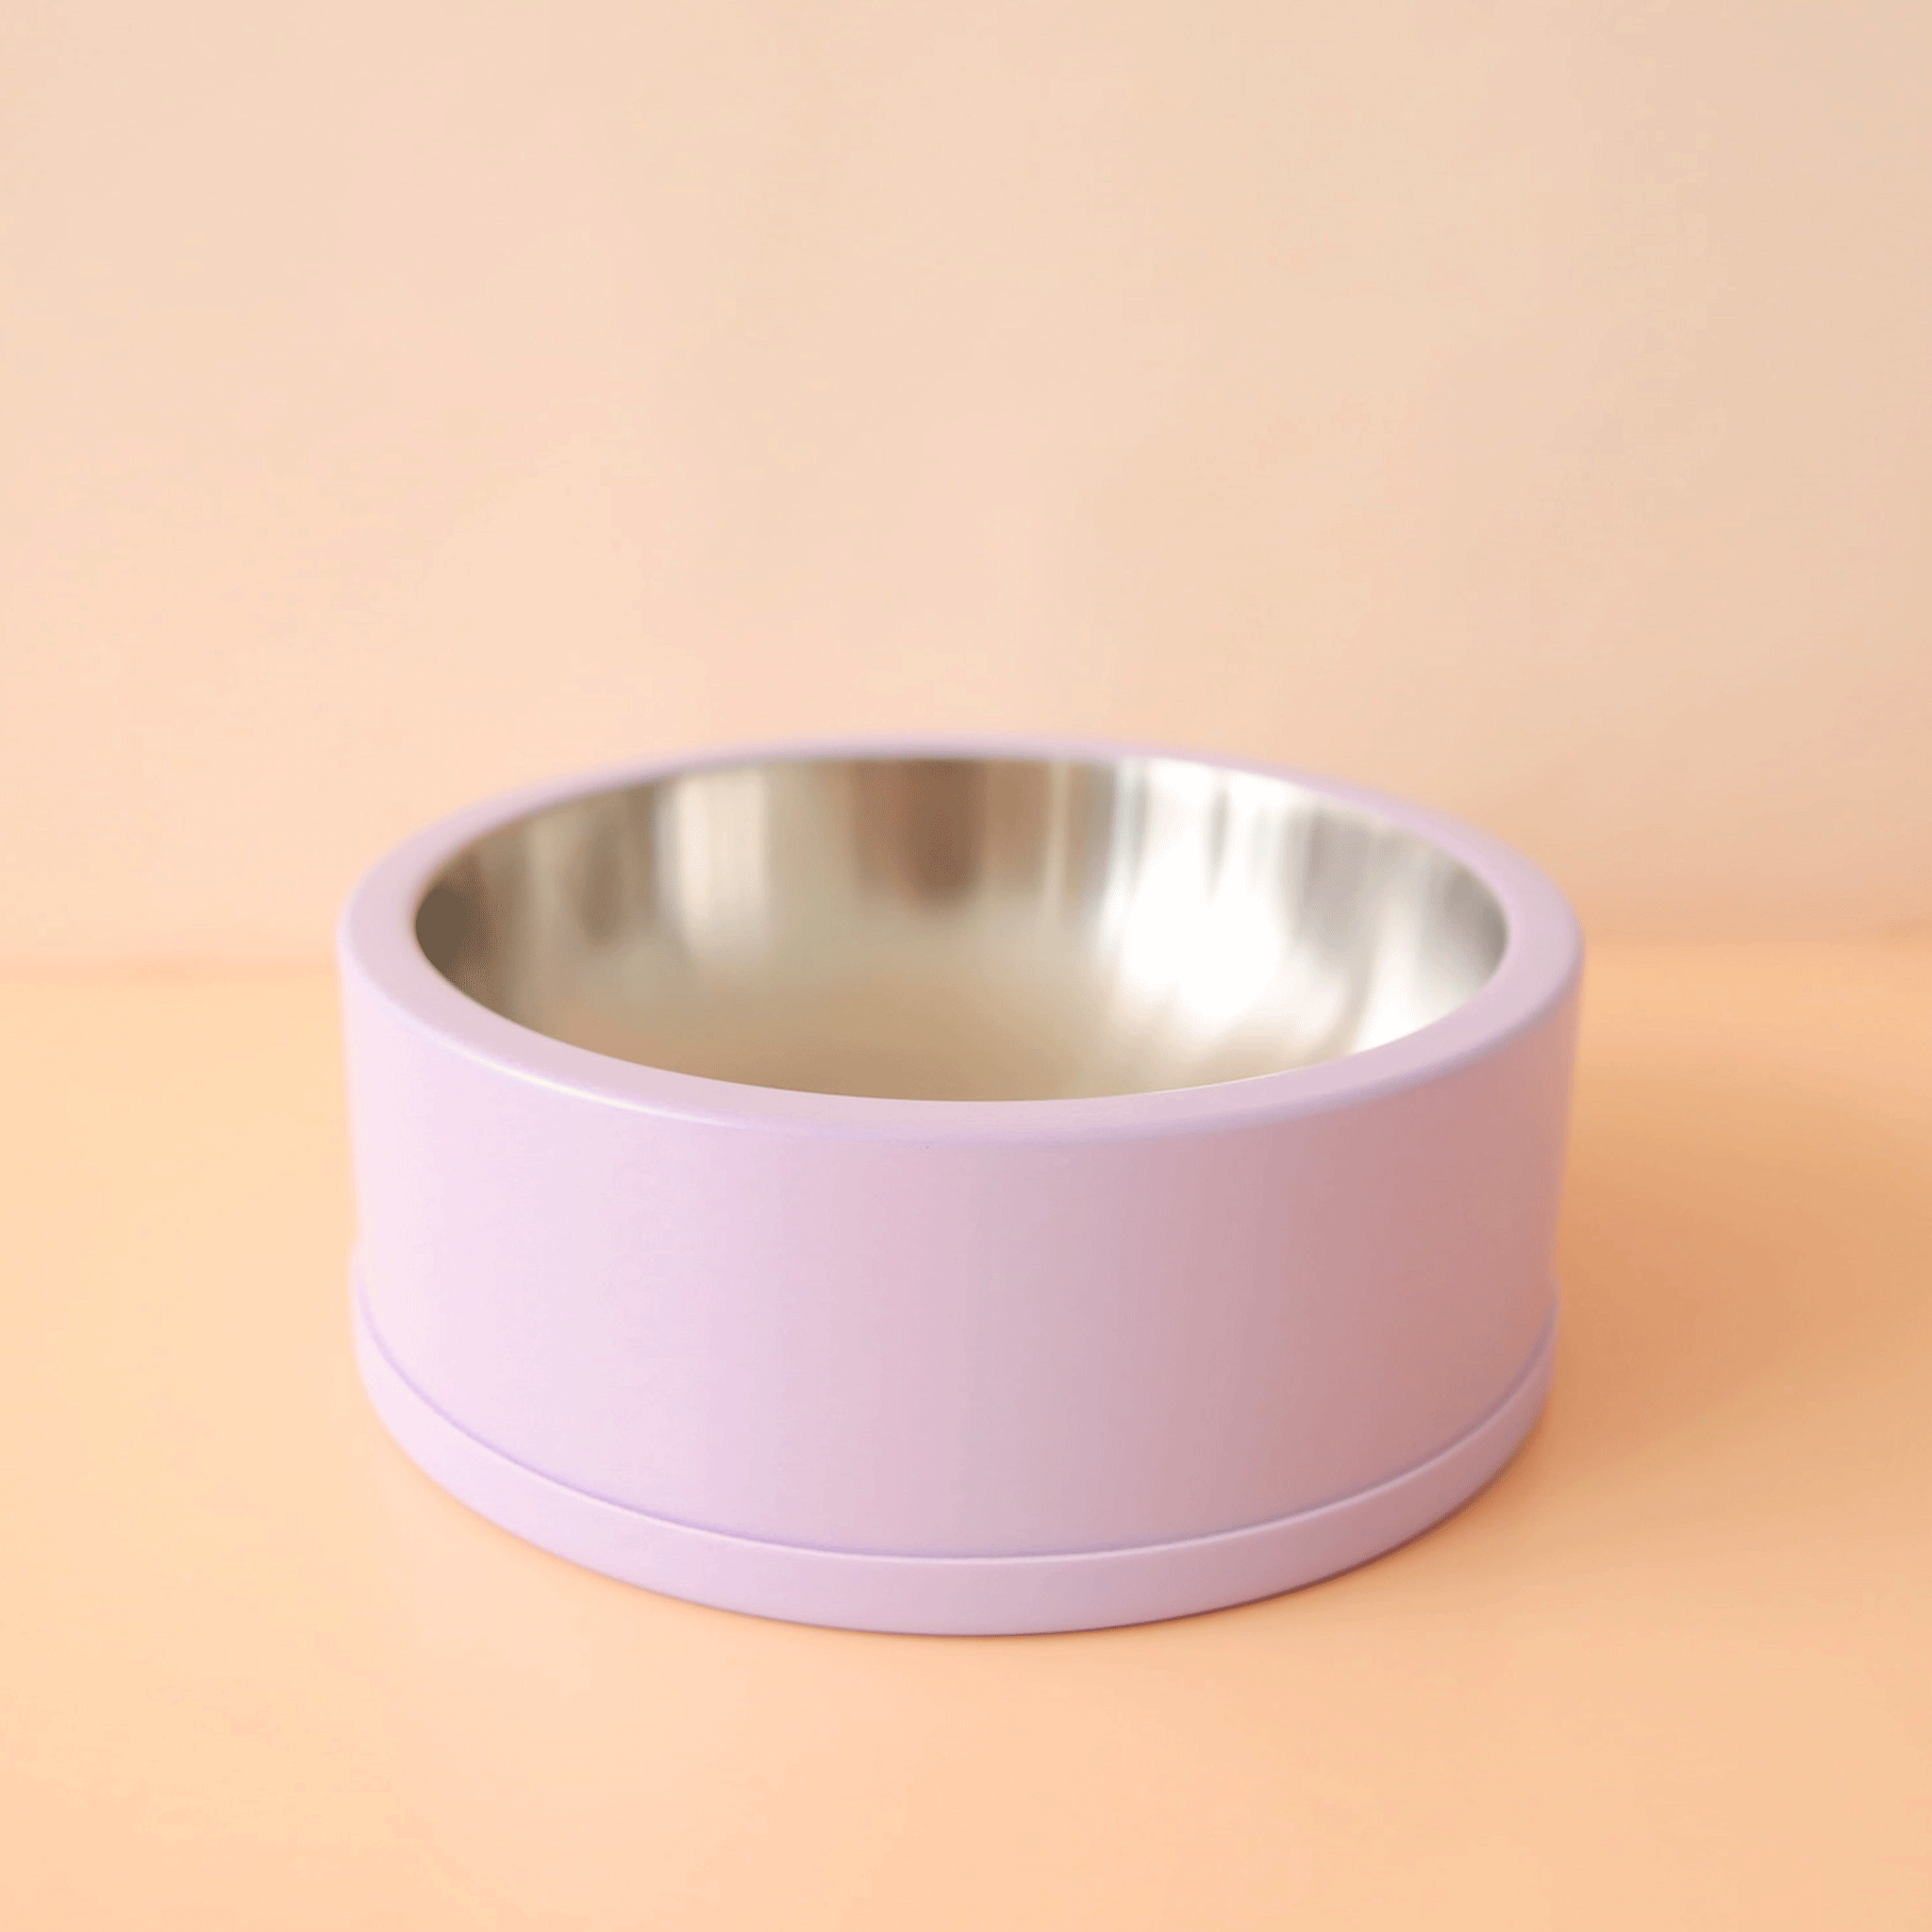 On a peachy background is a lavender dog bowl with a stainless steel interior.